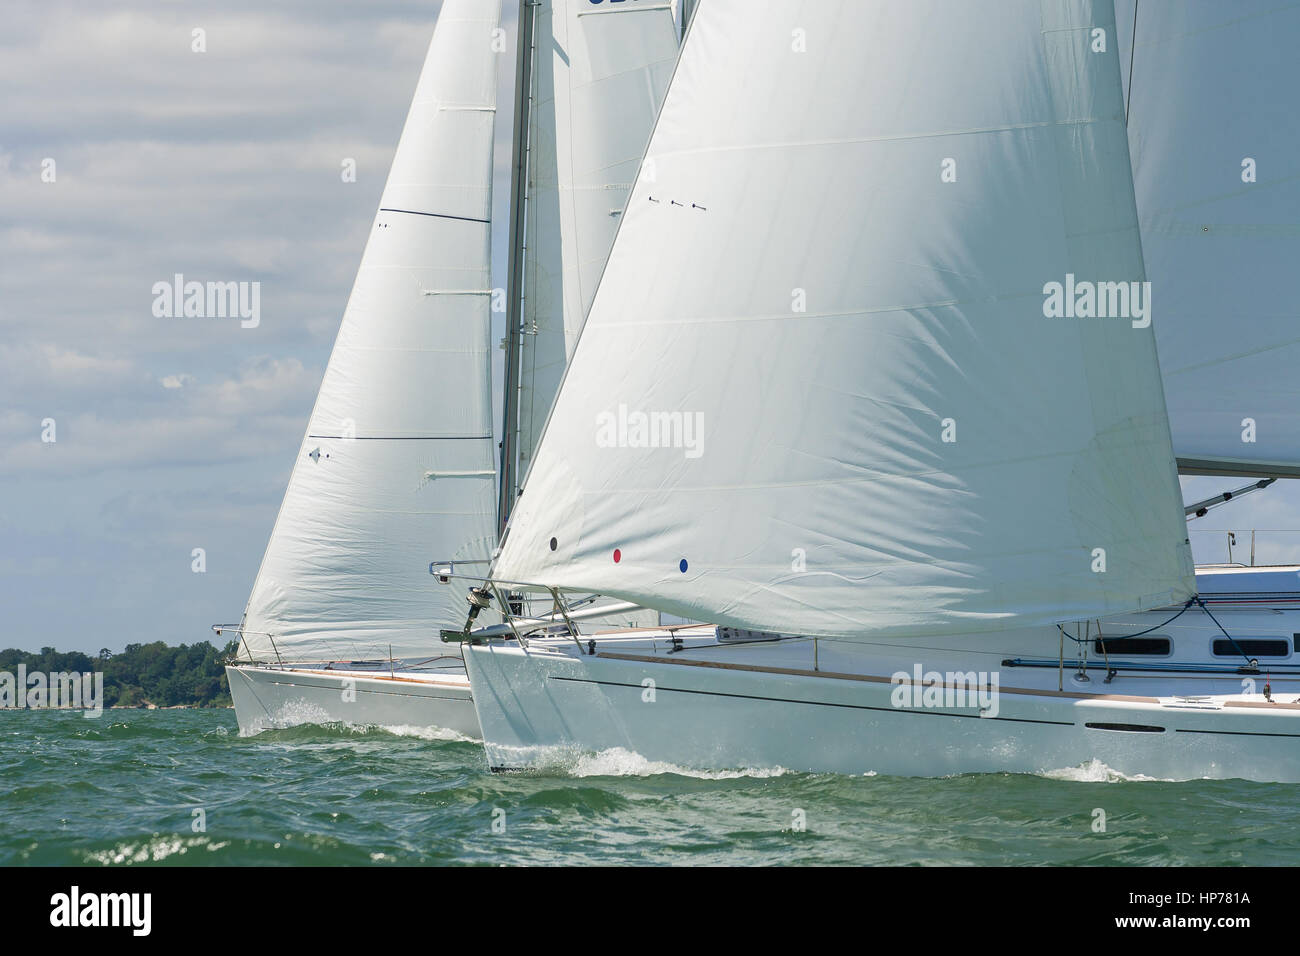 Two beautiful white yachts sailing close to each other on a bright sunny day Stock Photo